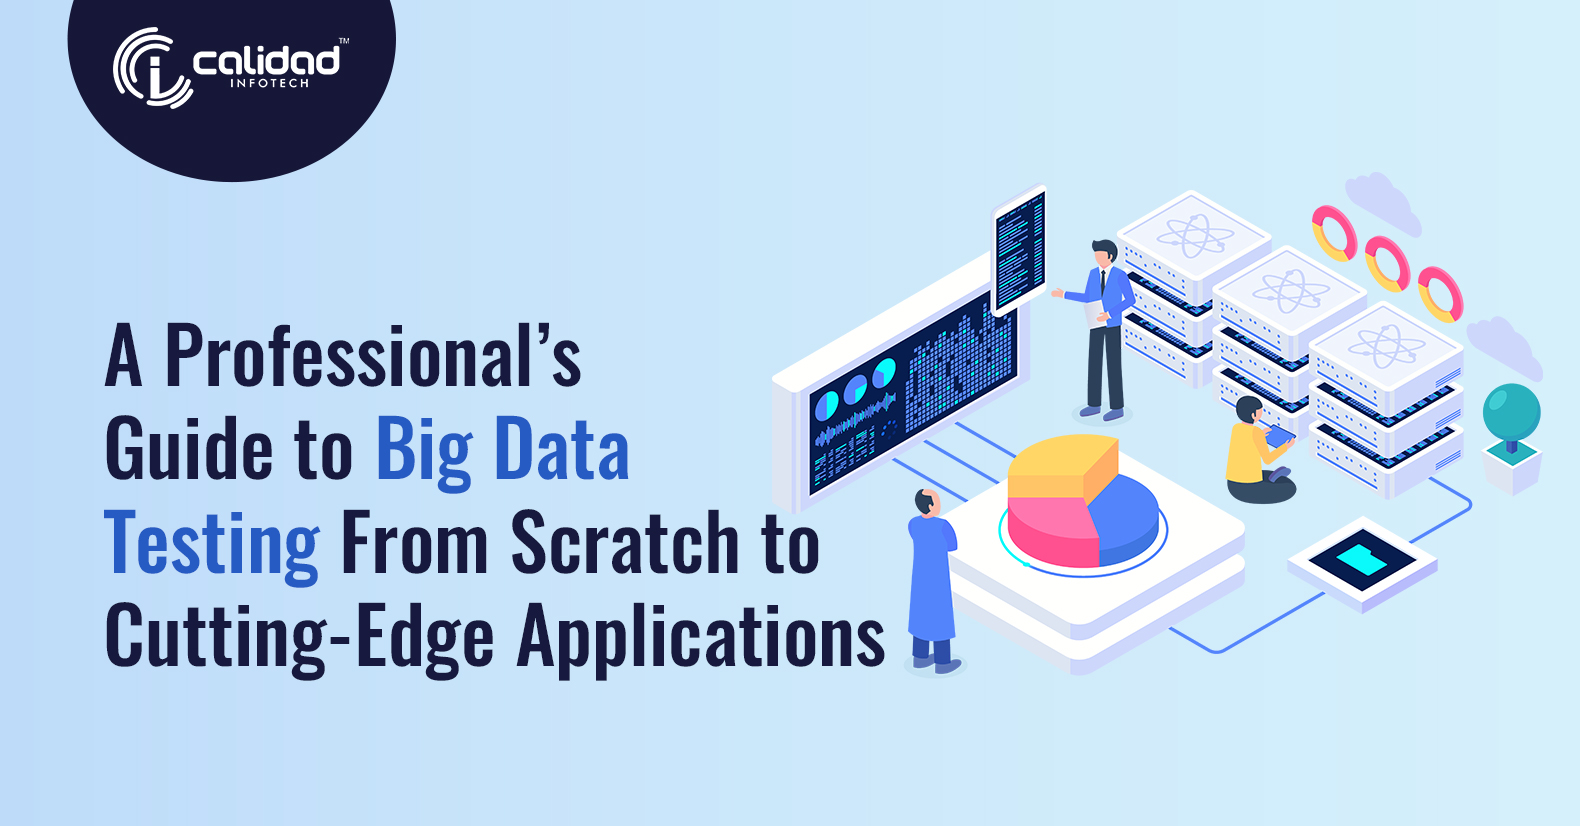 A Guide to Big Data Testing From Scratch to Cutting-Edge Applications